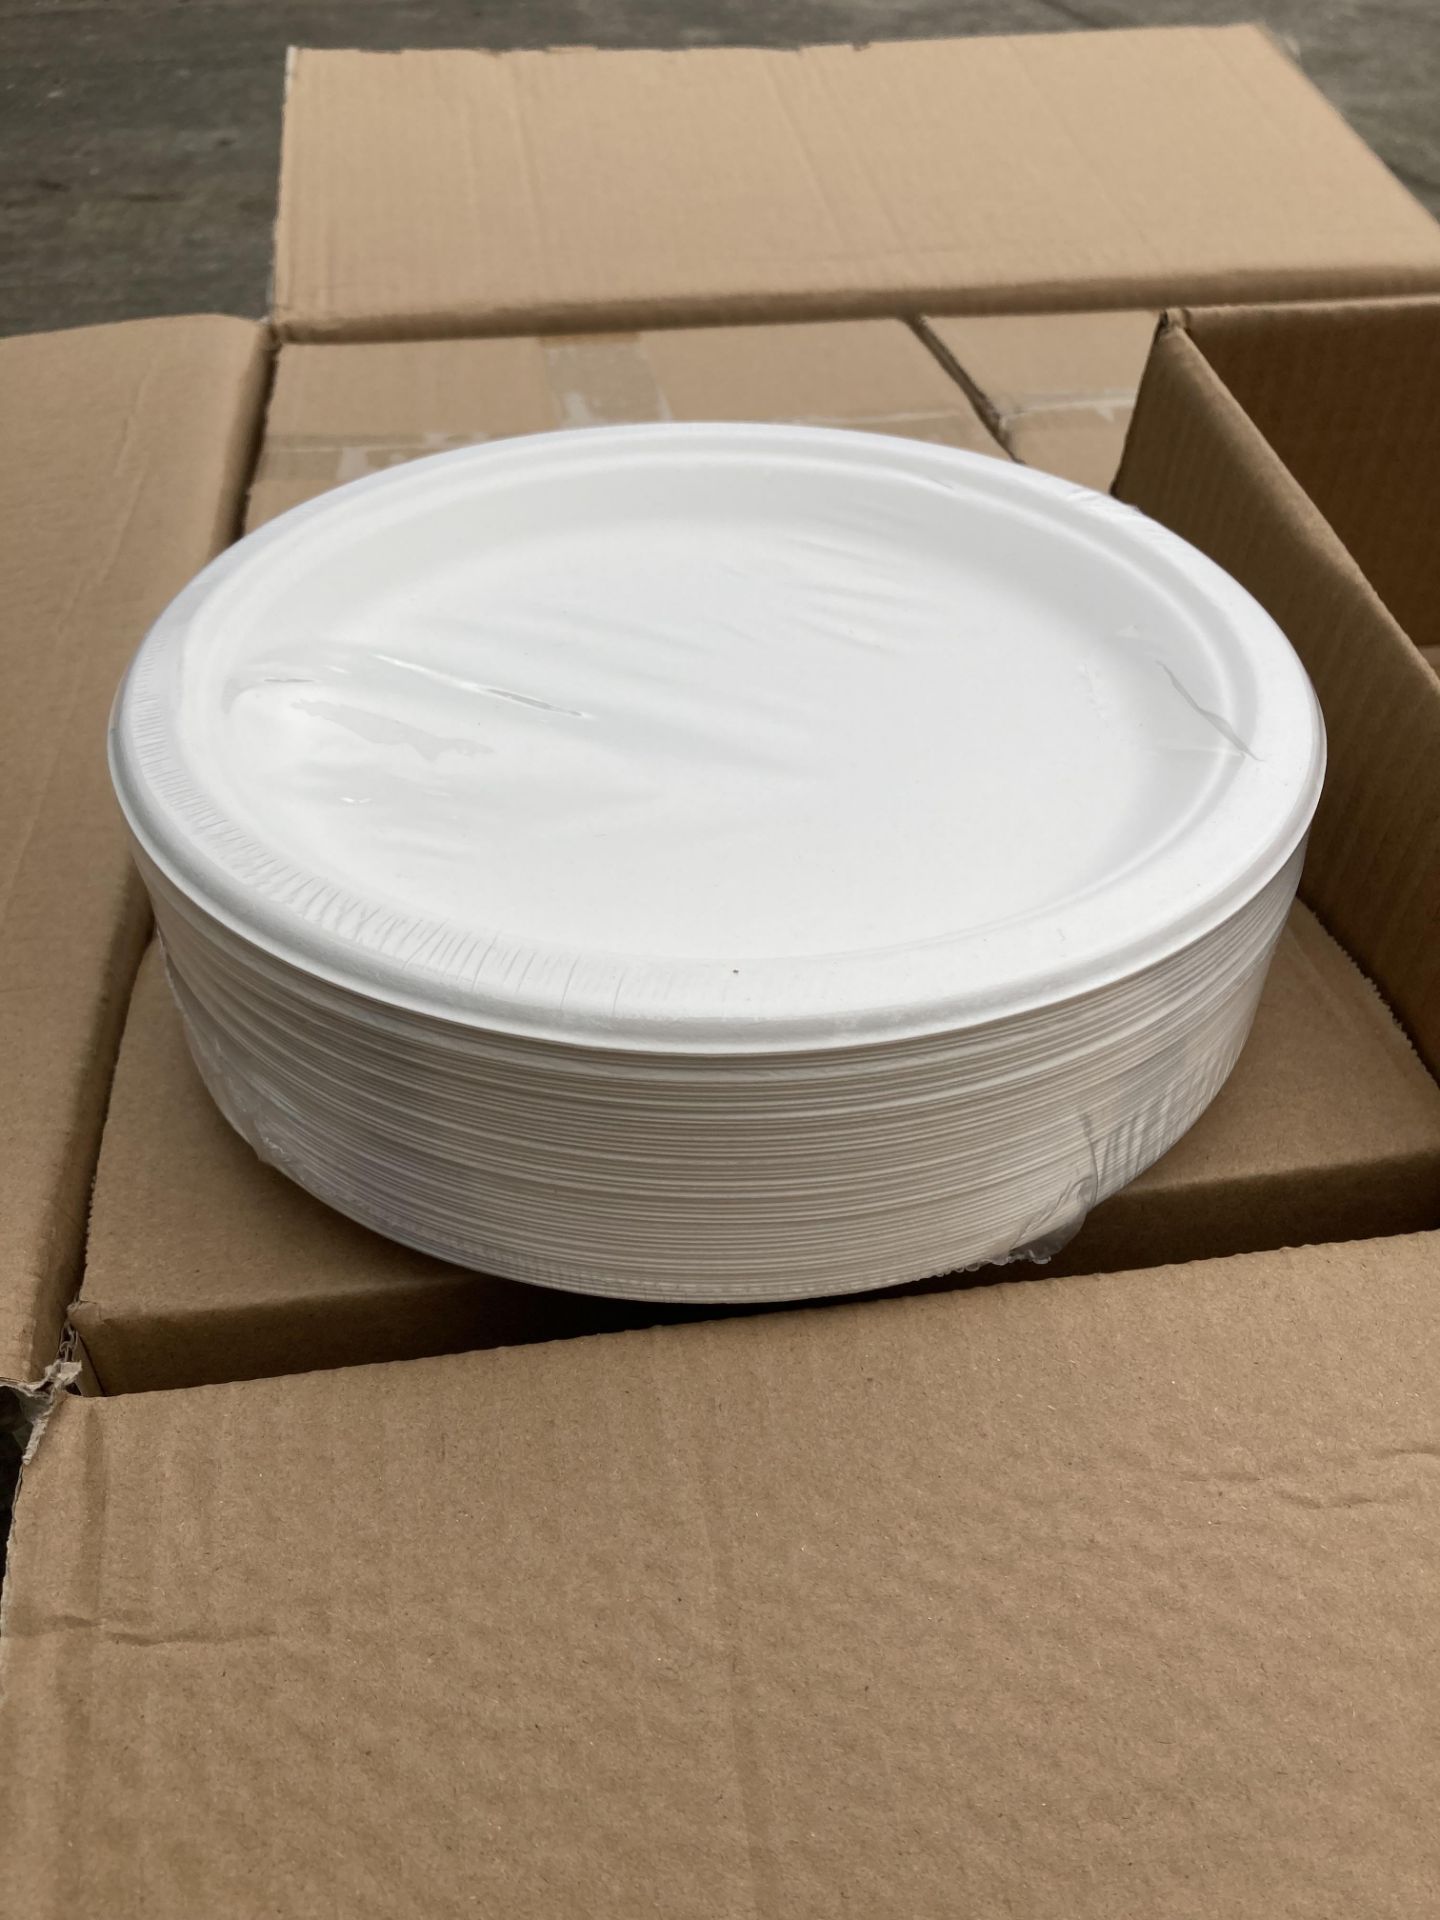 48 x Boxes of approximately 100 x Wooden Cutlery and Paper Plates (4 x outer boxes) (saleroom - Image 3 of 3